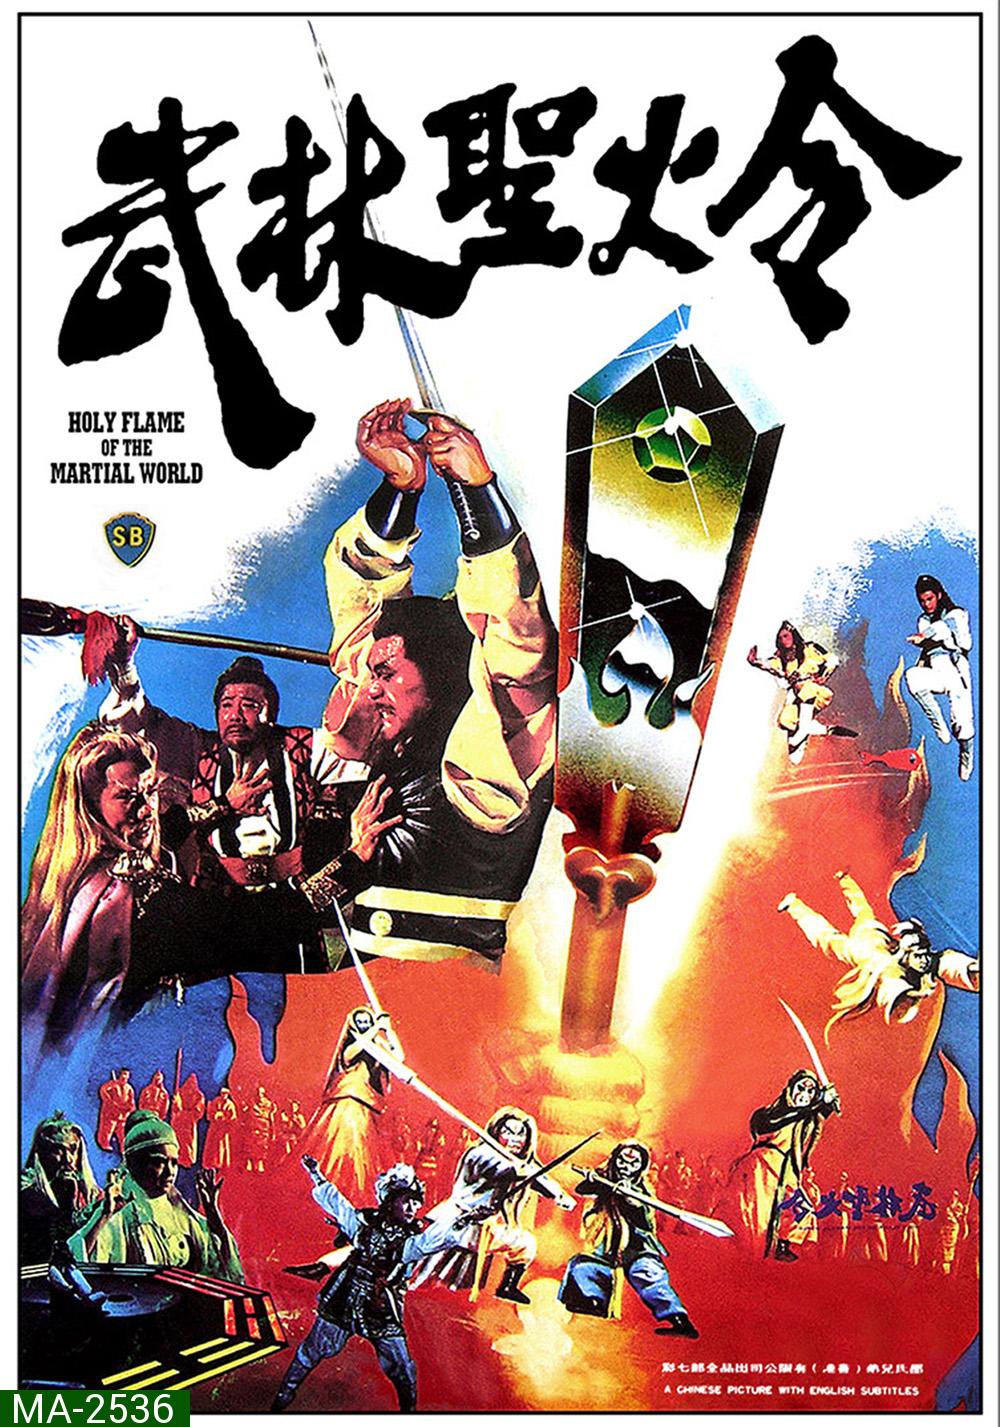 Holy Flame Of The Martial World (1983) ศึกชิงป้ายอภินิหาร